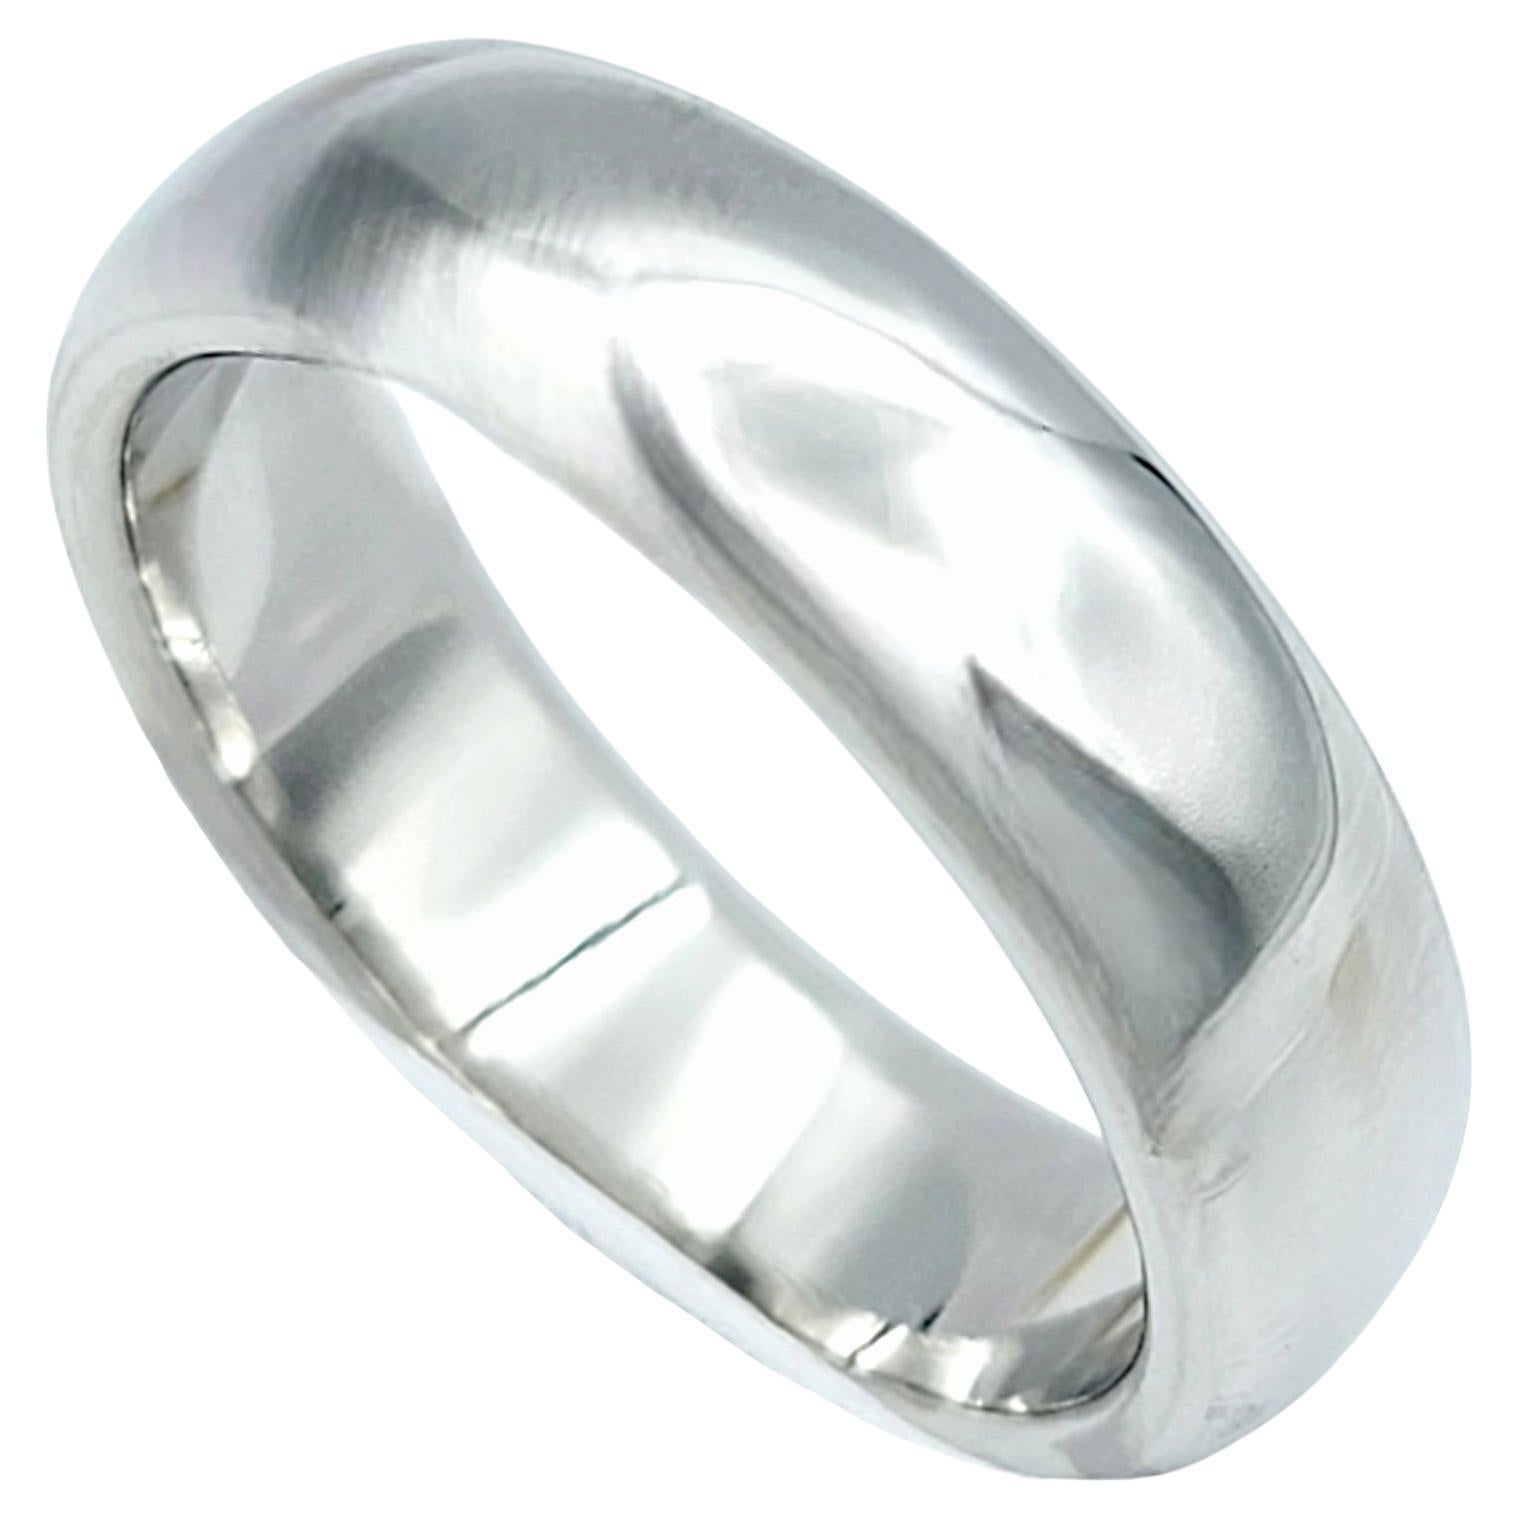 Ring size: 9 

This gorgeous Tiffany & Co. platinum wedding band ring, with its vintage half-round style and high polish finish, is a beautiful work of art to add to any jewelry collection. The use of platinum sets this ring apart, as platinum is